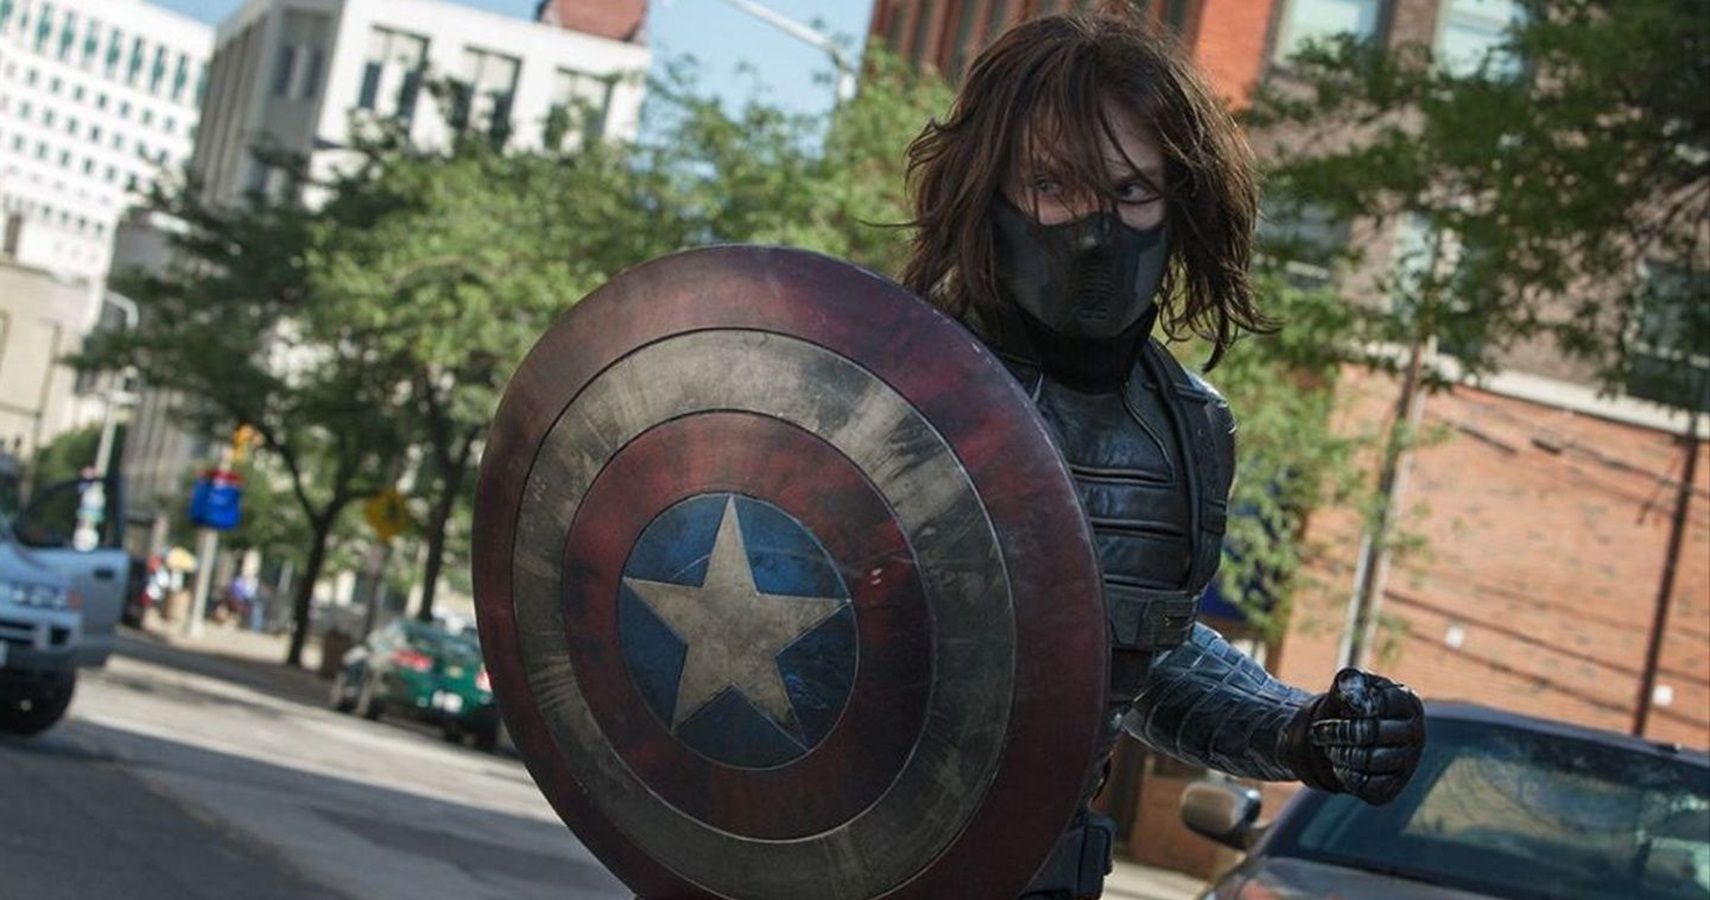 Bucky as The WInter Soldier holding Captain America's shield